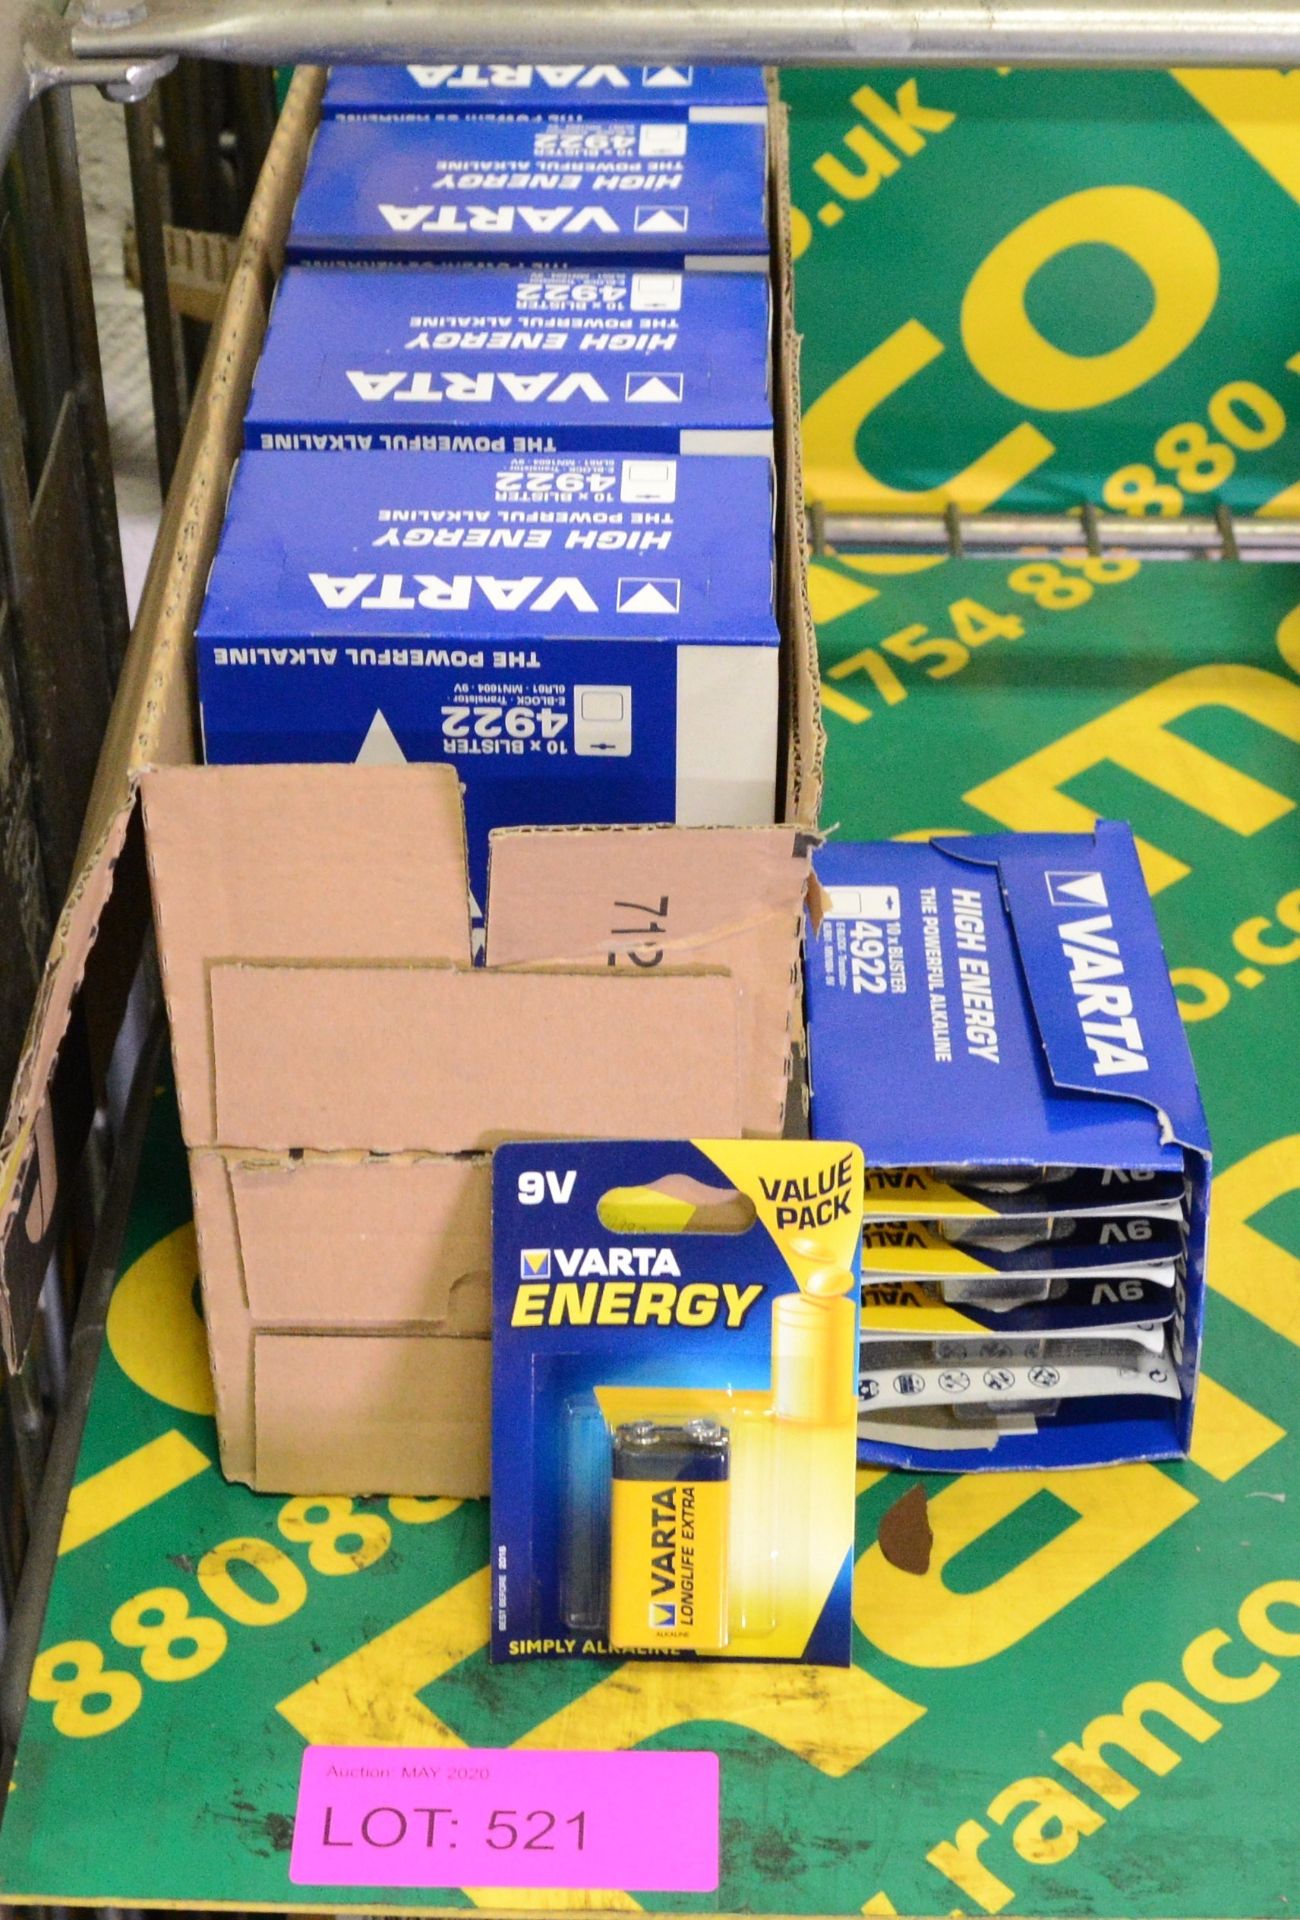 2x Boxes of Varta High Energy 9V Batteries - 50 per box - OUT OF DATE.